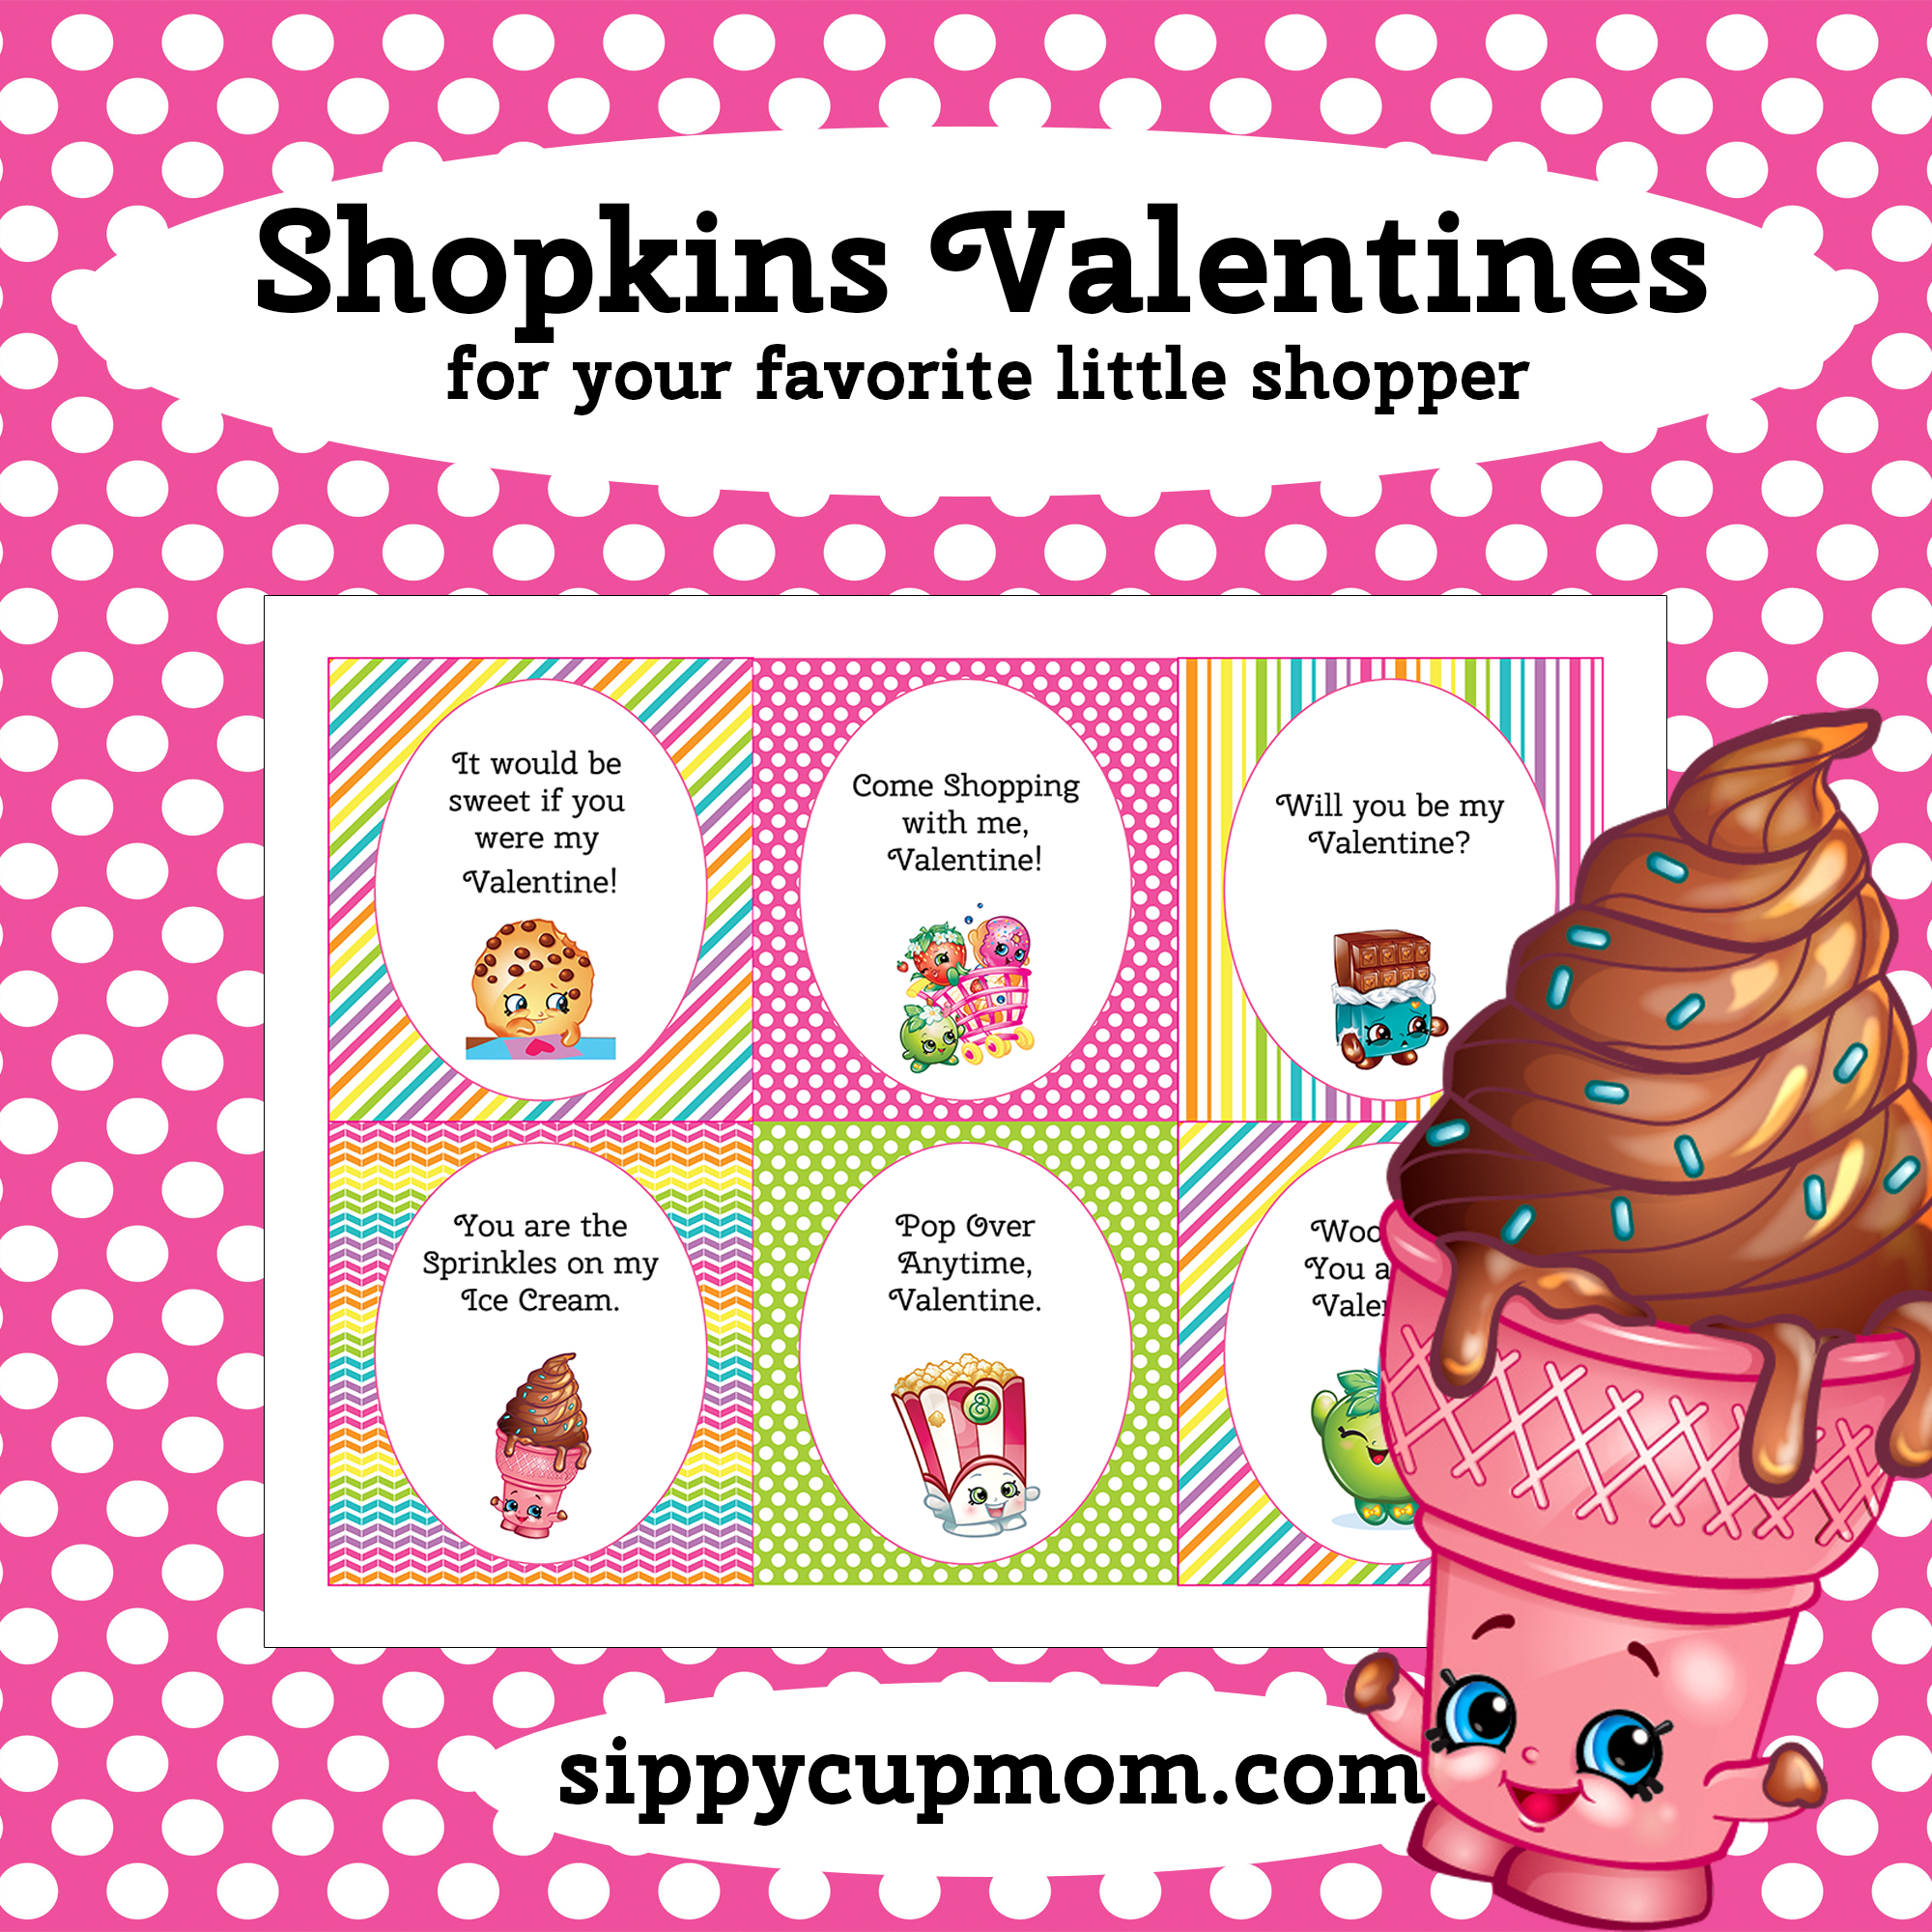 Free Printable Shopkins Valentine&amp;#039;s Day Cards - Sippy Cup Mom - Free Printable Valentines Day Cards For Mom And Dad